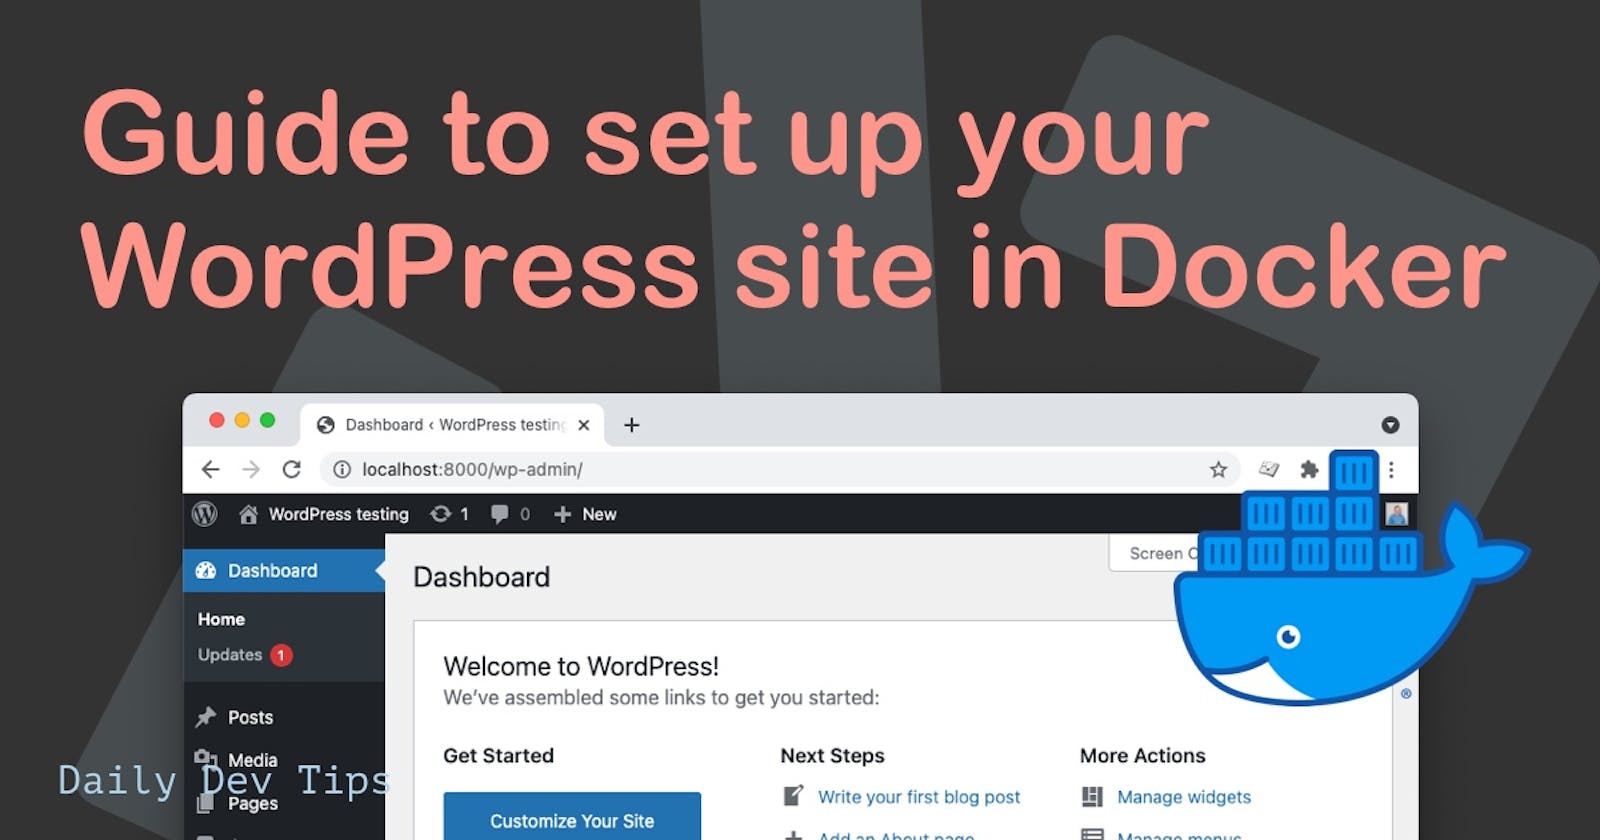 Guide to set up your WordPress site in Docker